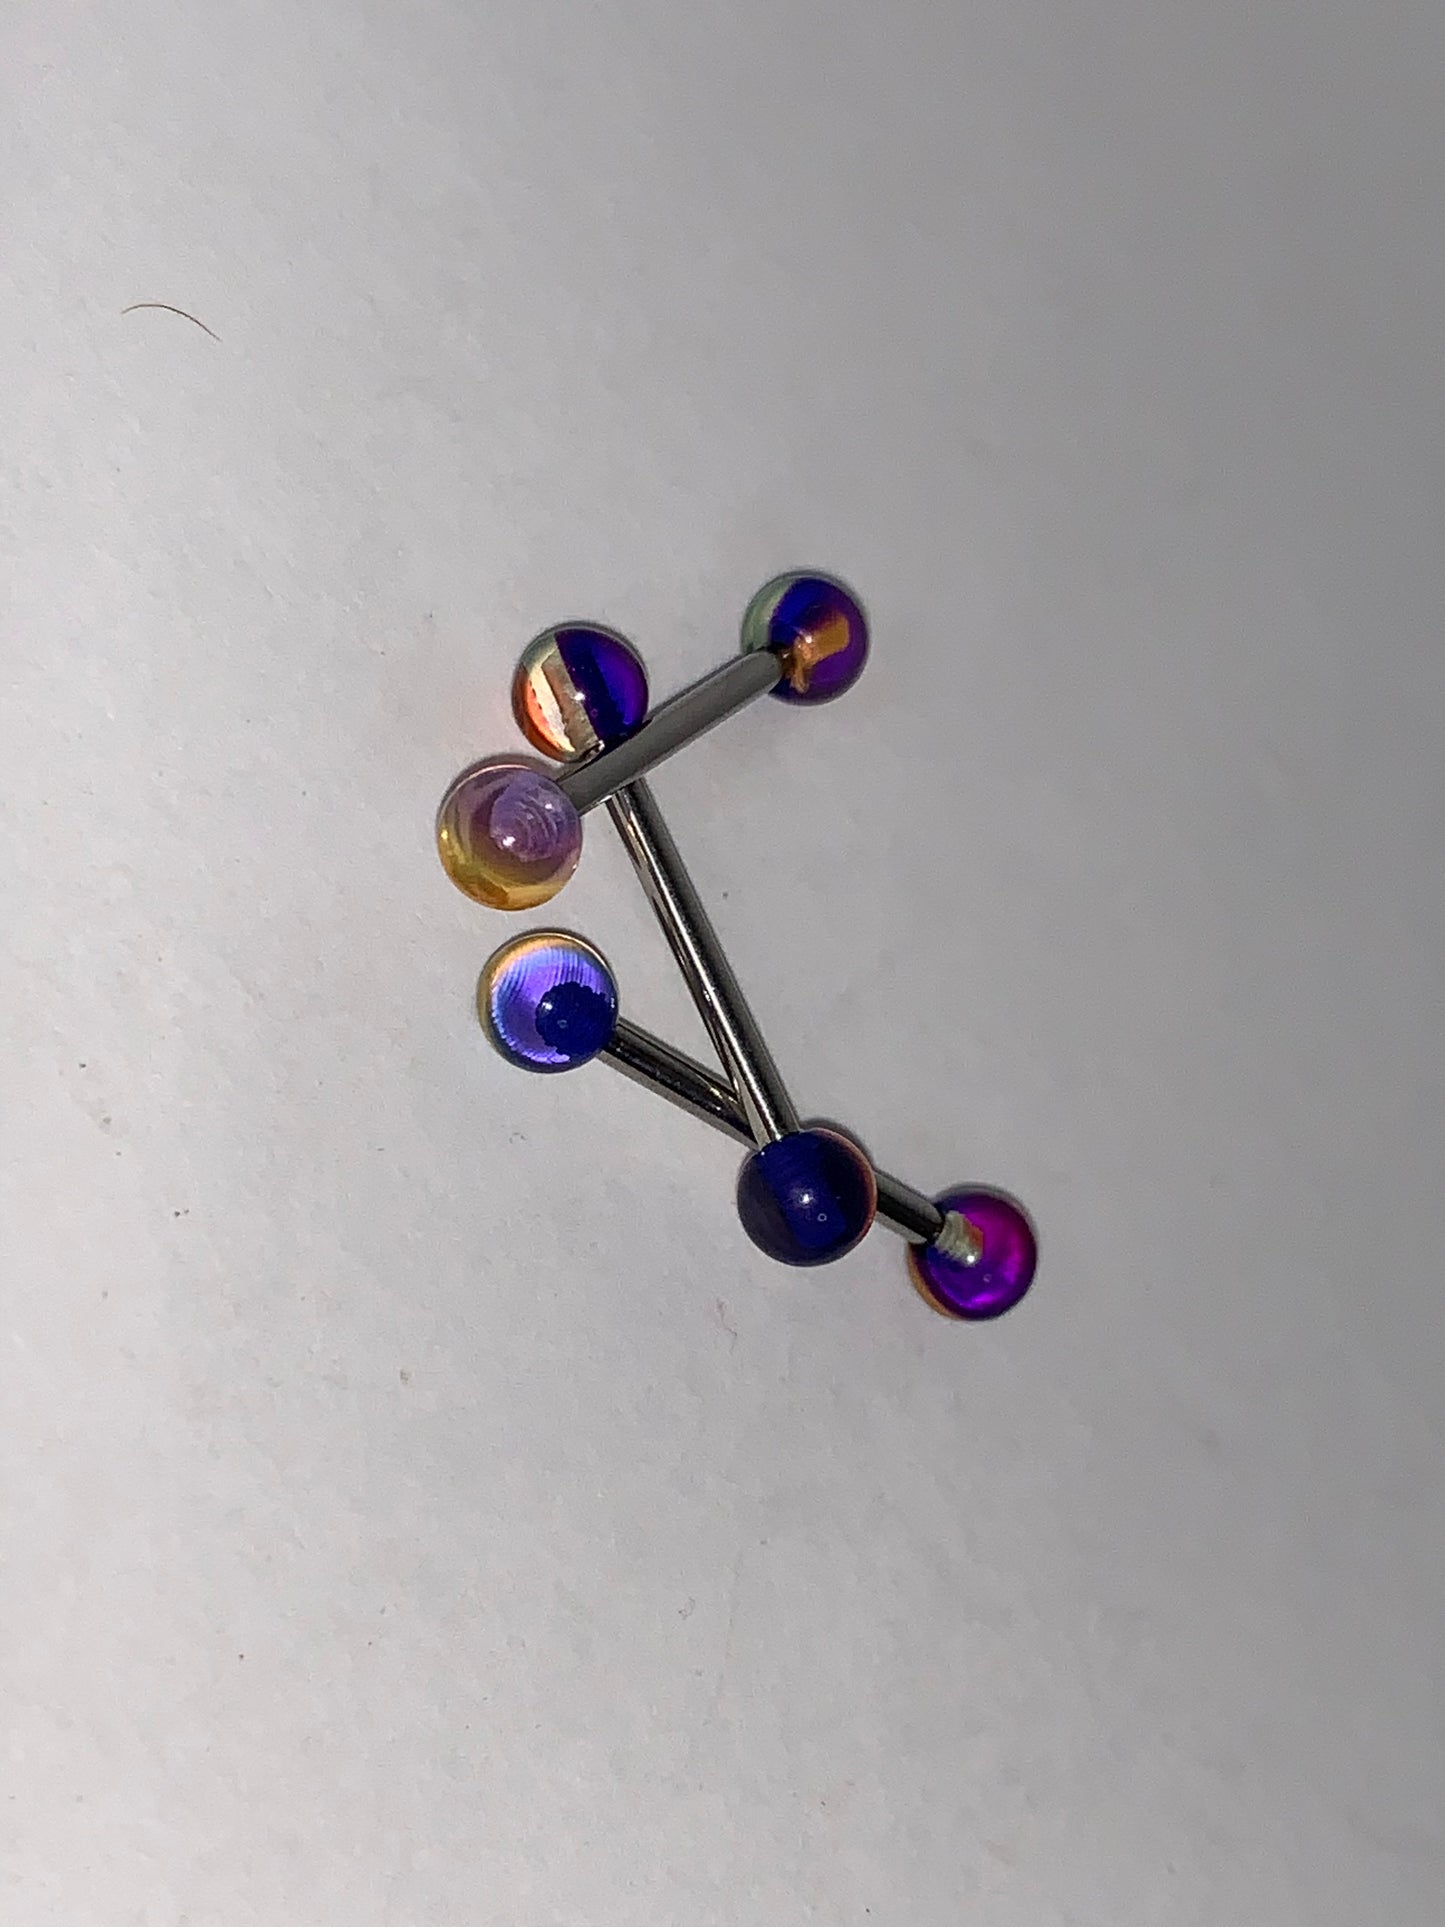 14 Gauge Purple, Clear and Orange Striped Tongue Ring